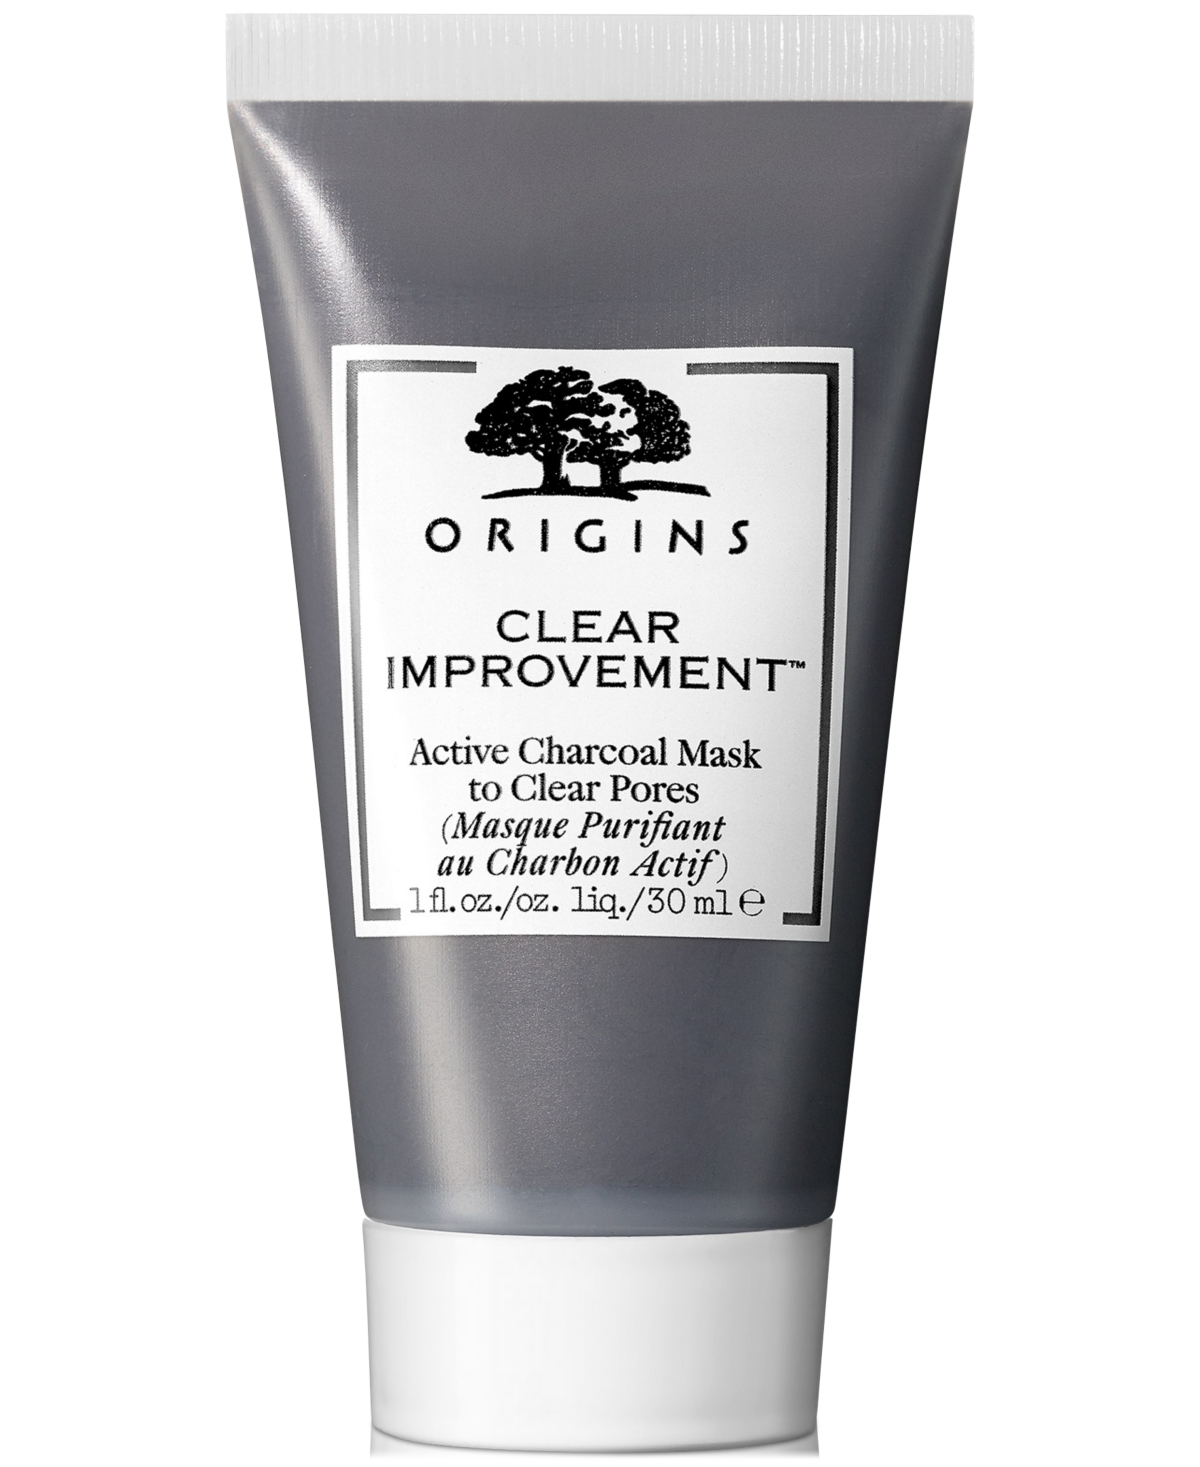 Clear Improvement Active Charcoal Face Mask to Clear Pores, 1 oz.